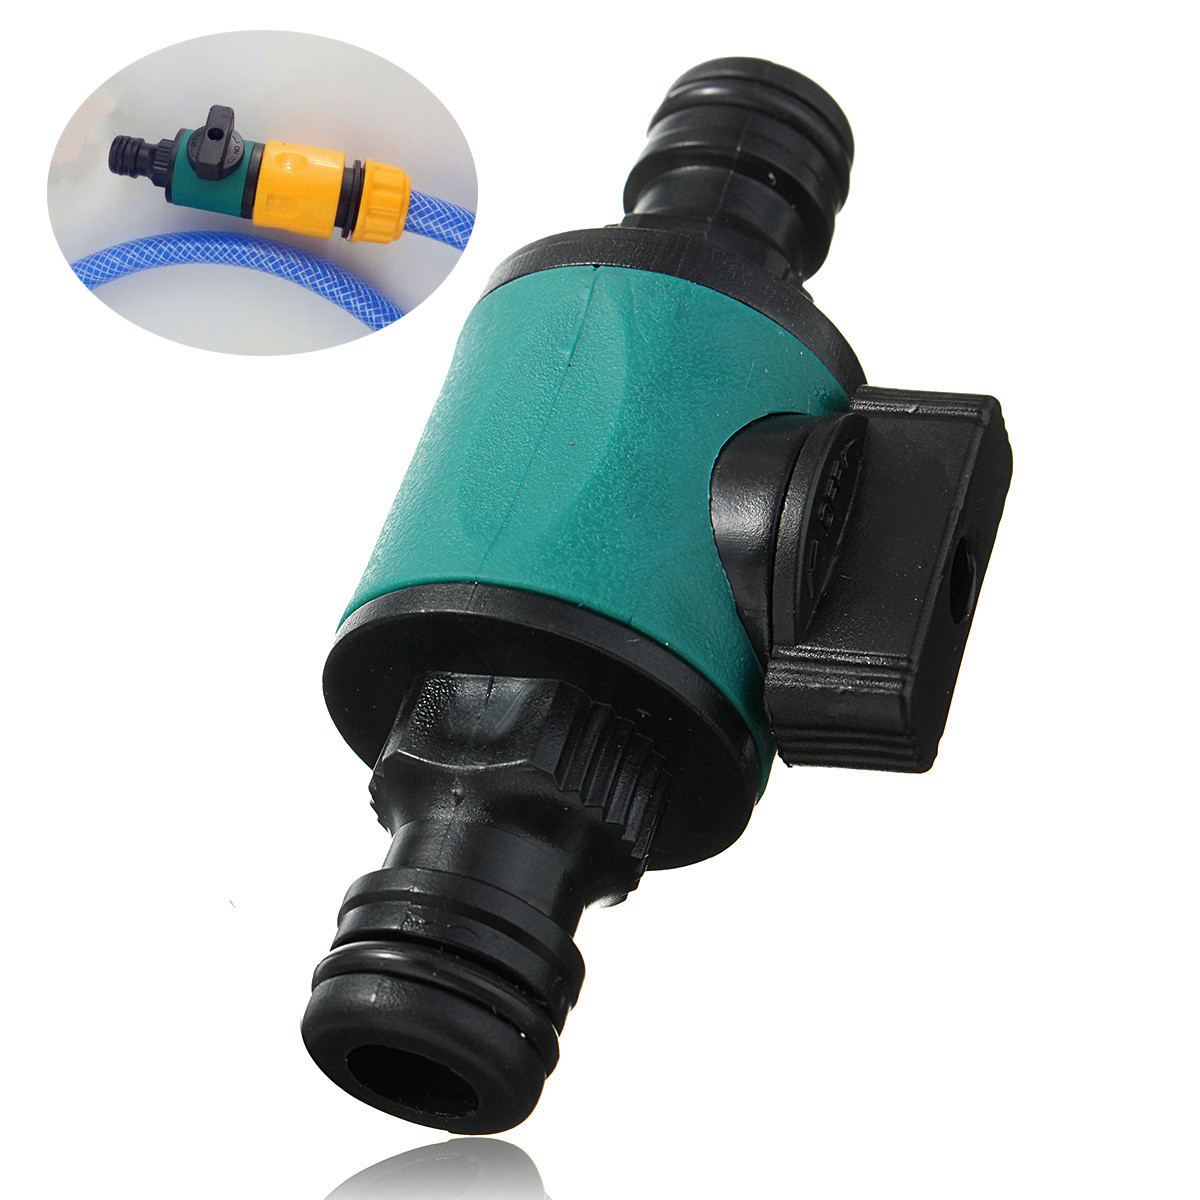 Garden-Hose-Tap-Pipe-Compatible-12-2-Way-Connector-Valve-Convertor-Fitting-Adapter-Tool-1290232-1